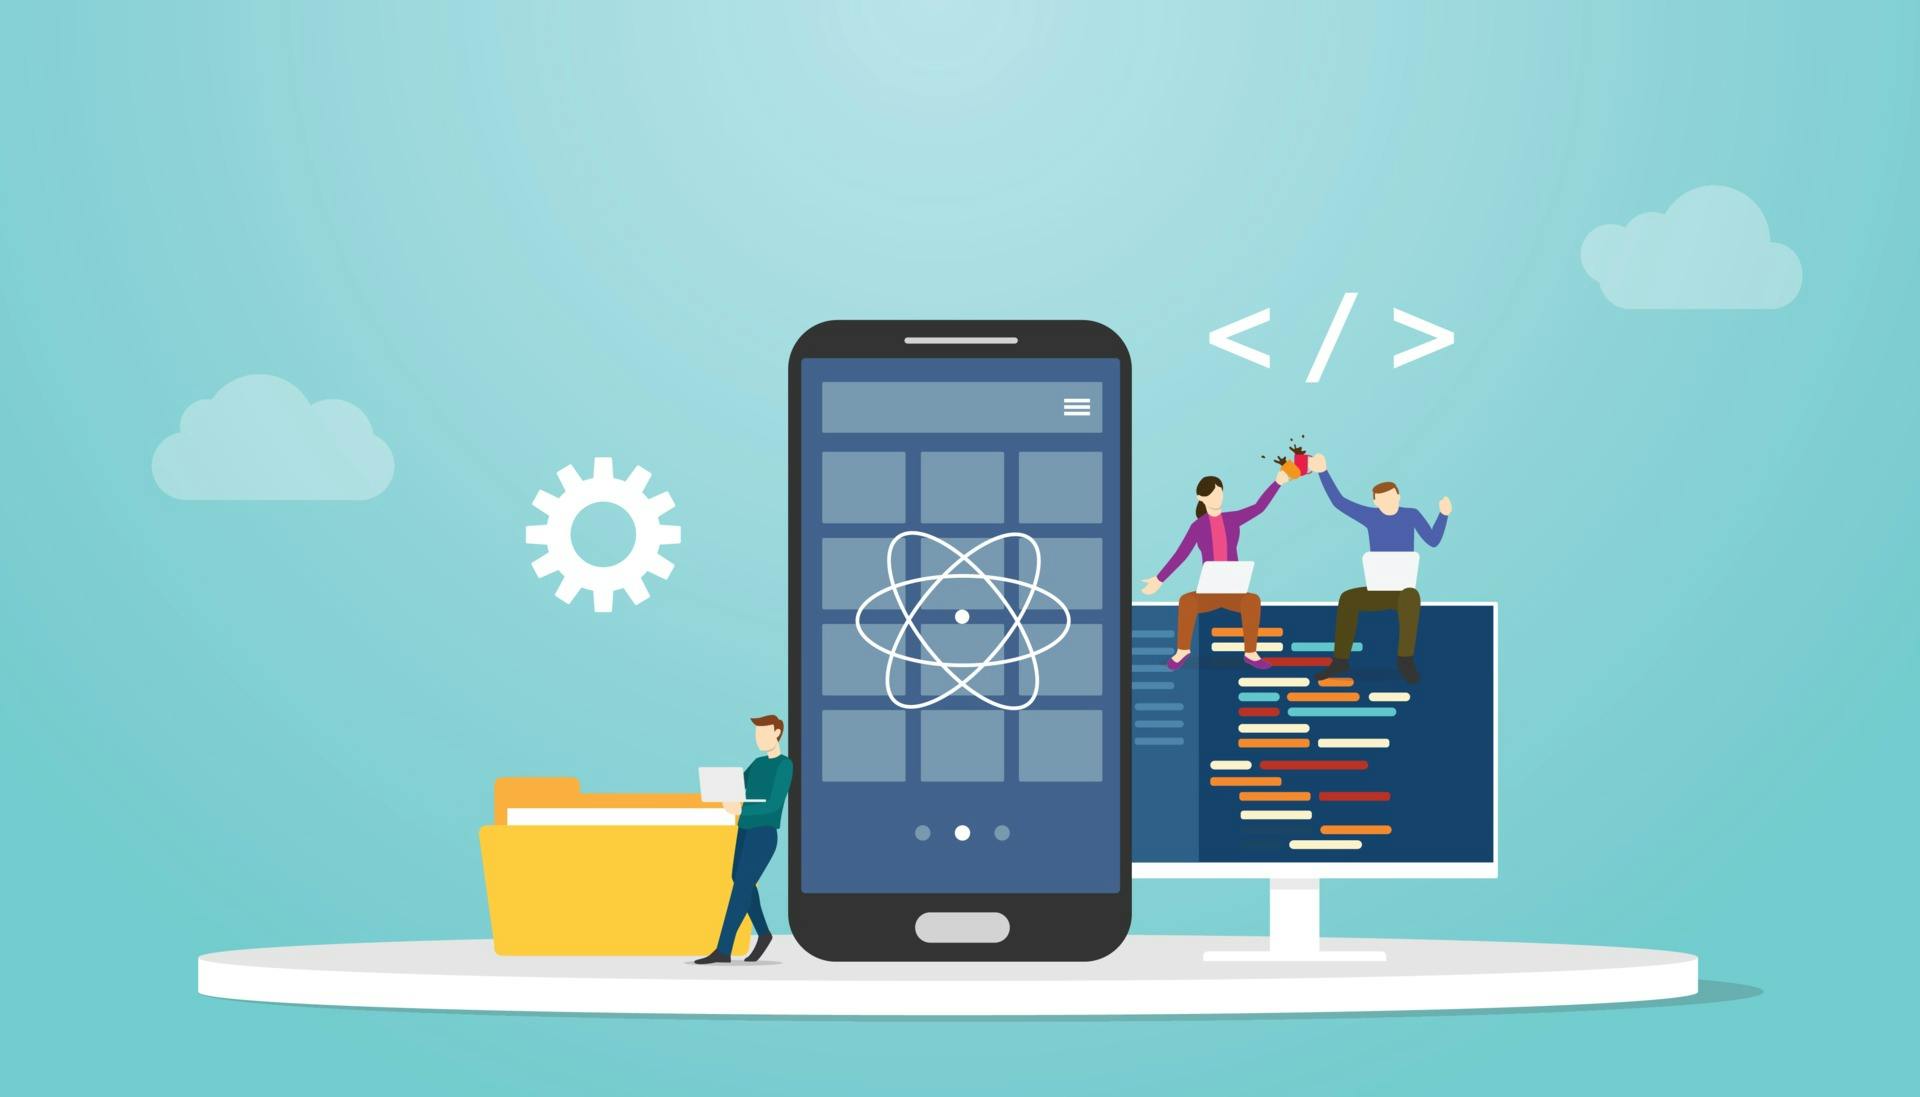 Vector illustration of smartphone with React atom superimposed over the center of it. Two people are on the side giving a high five. 